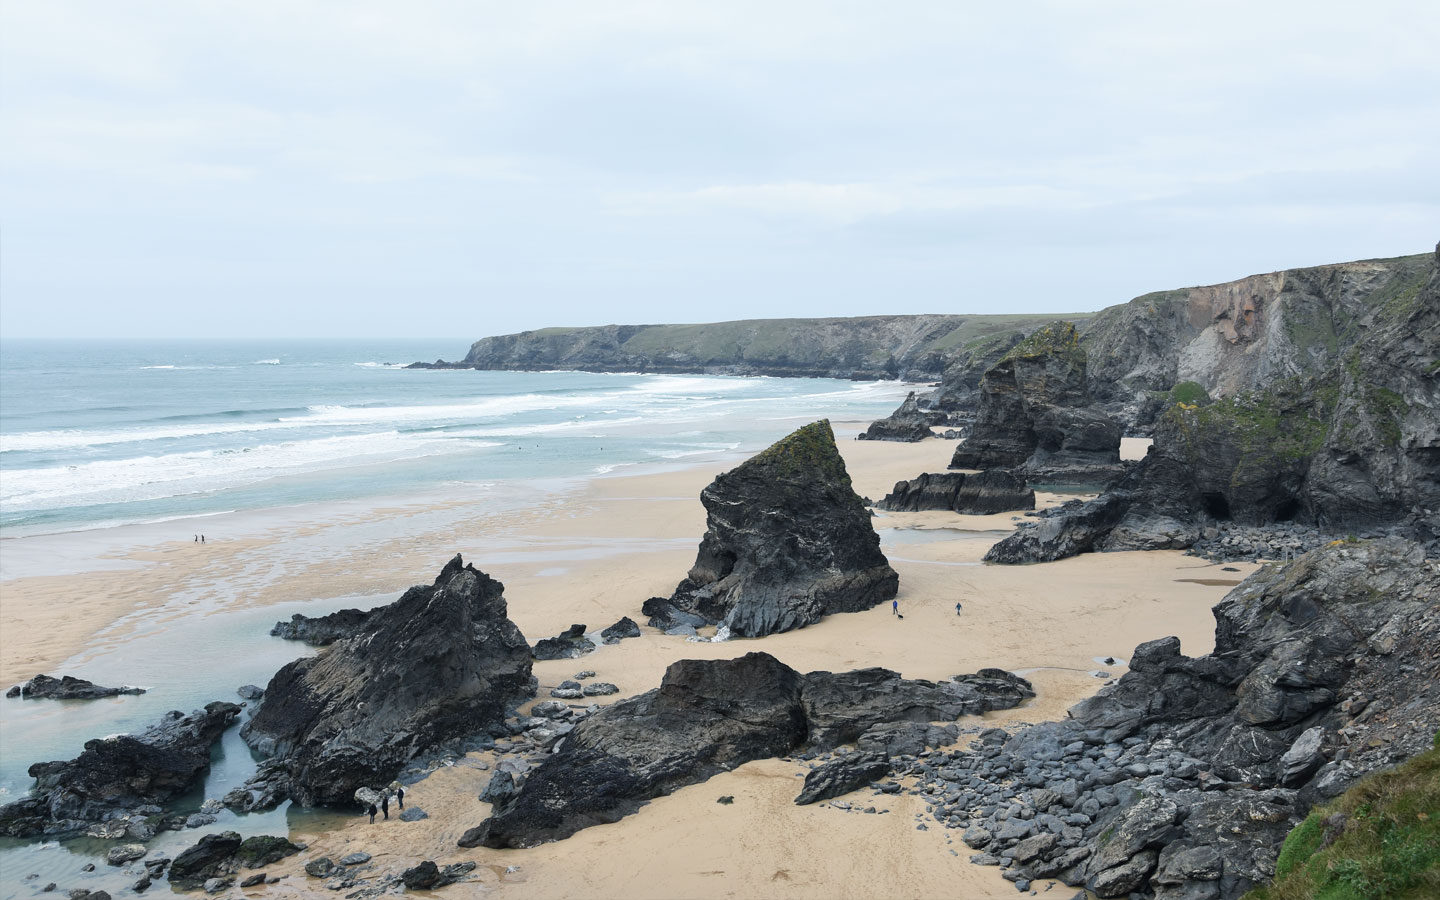 bedruthan stacks on beach near newquay in cornwall